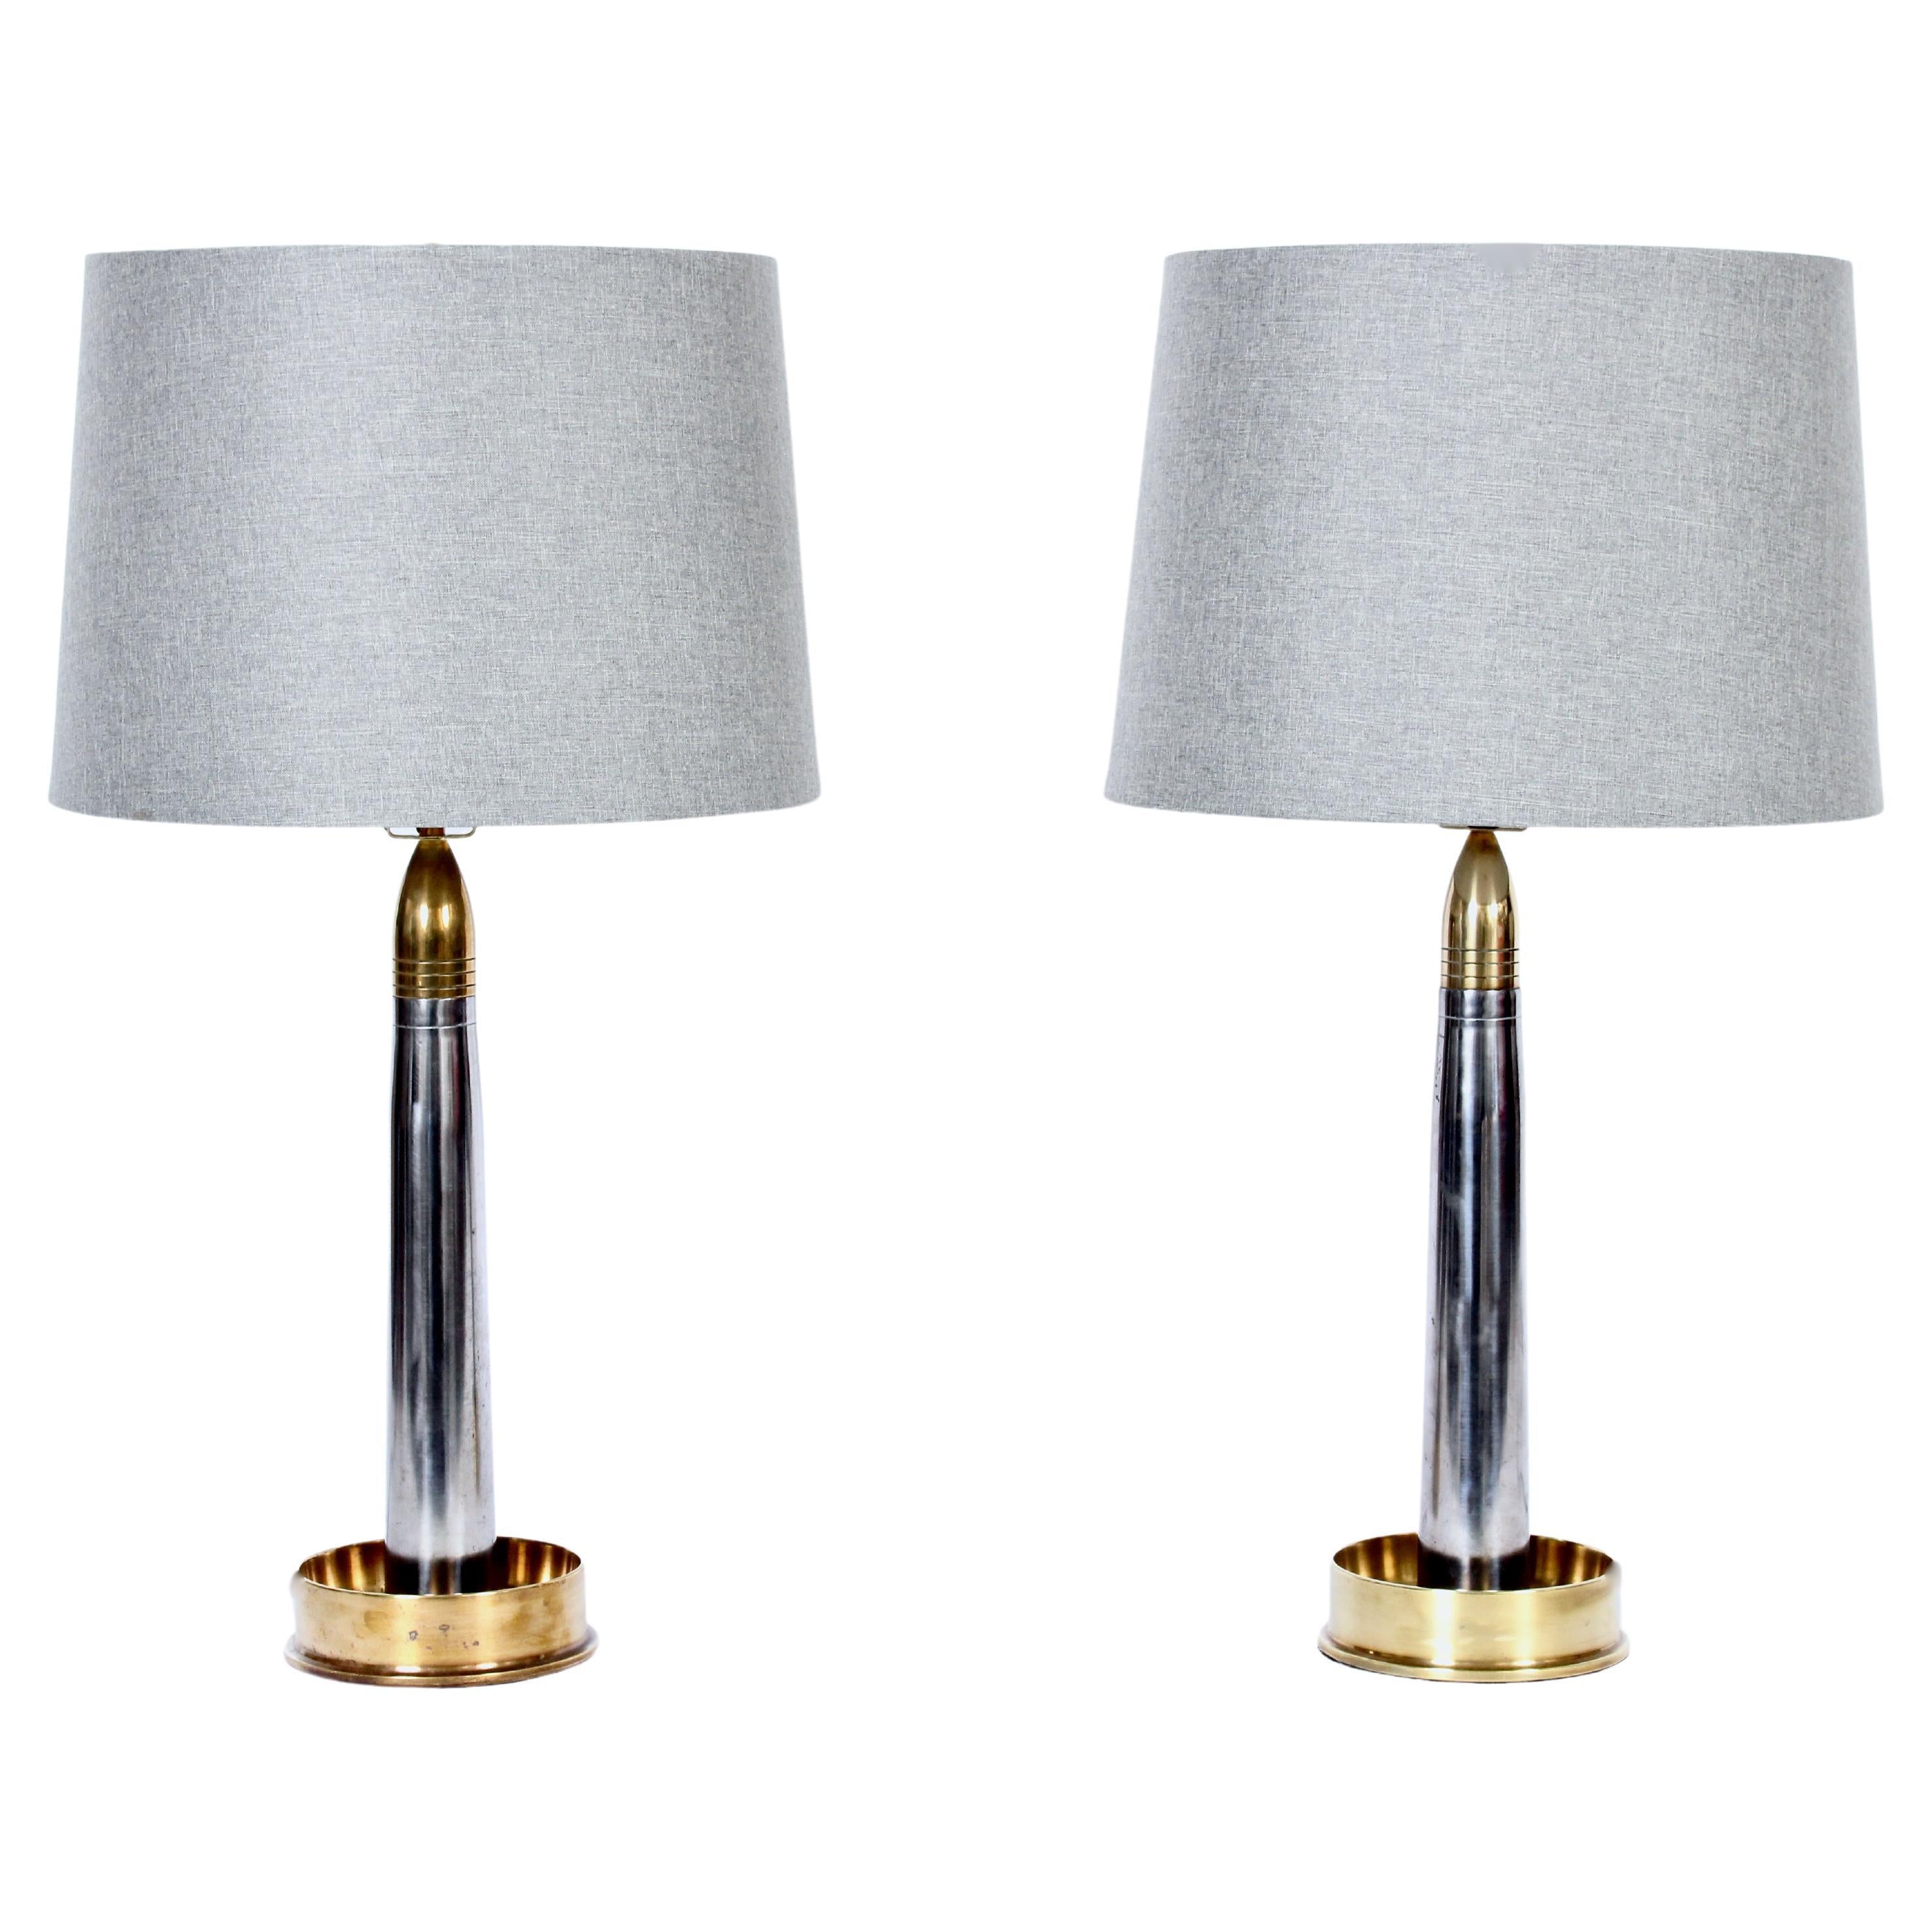 Pair of WWII "Trench Art" Nickel-Plate & Solid Brass Table Lamps, 1940's